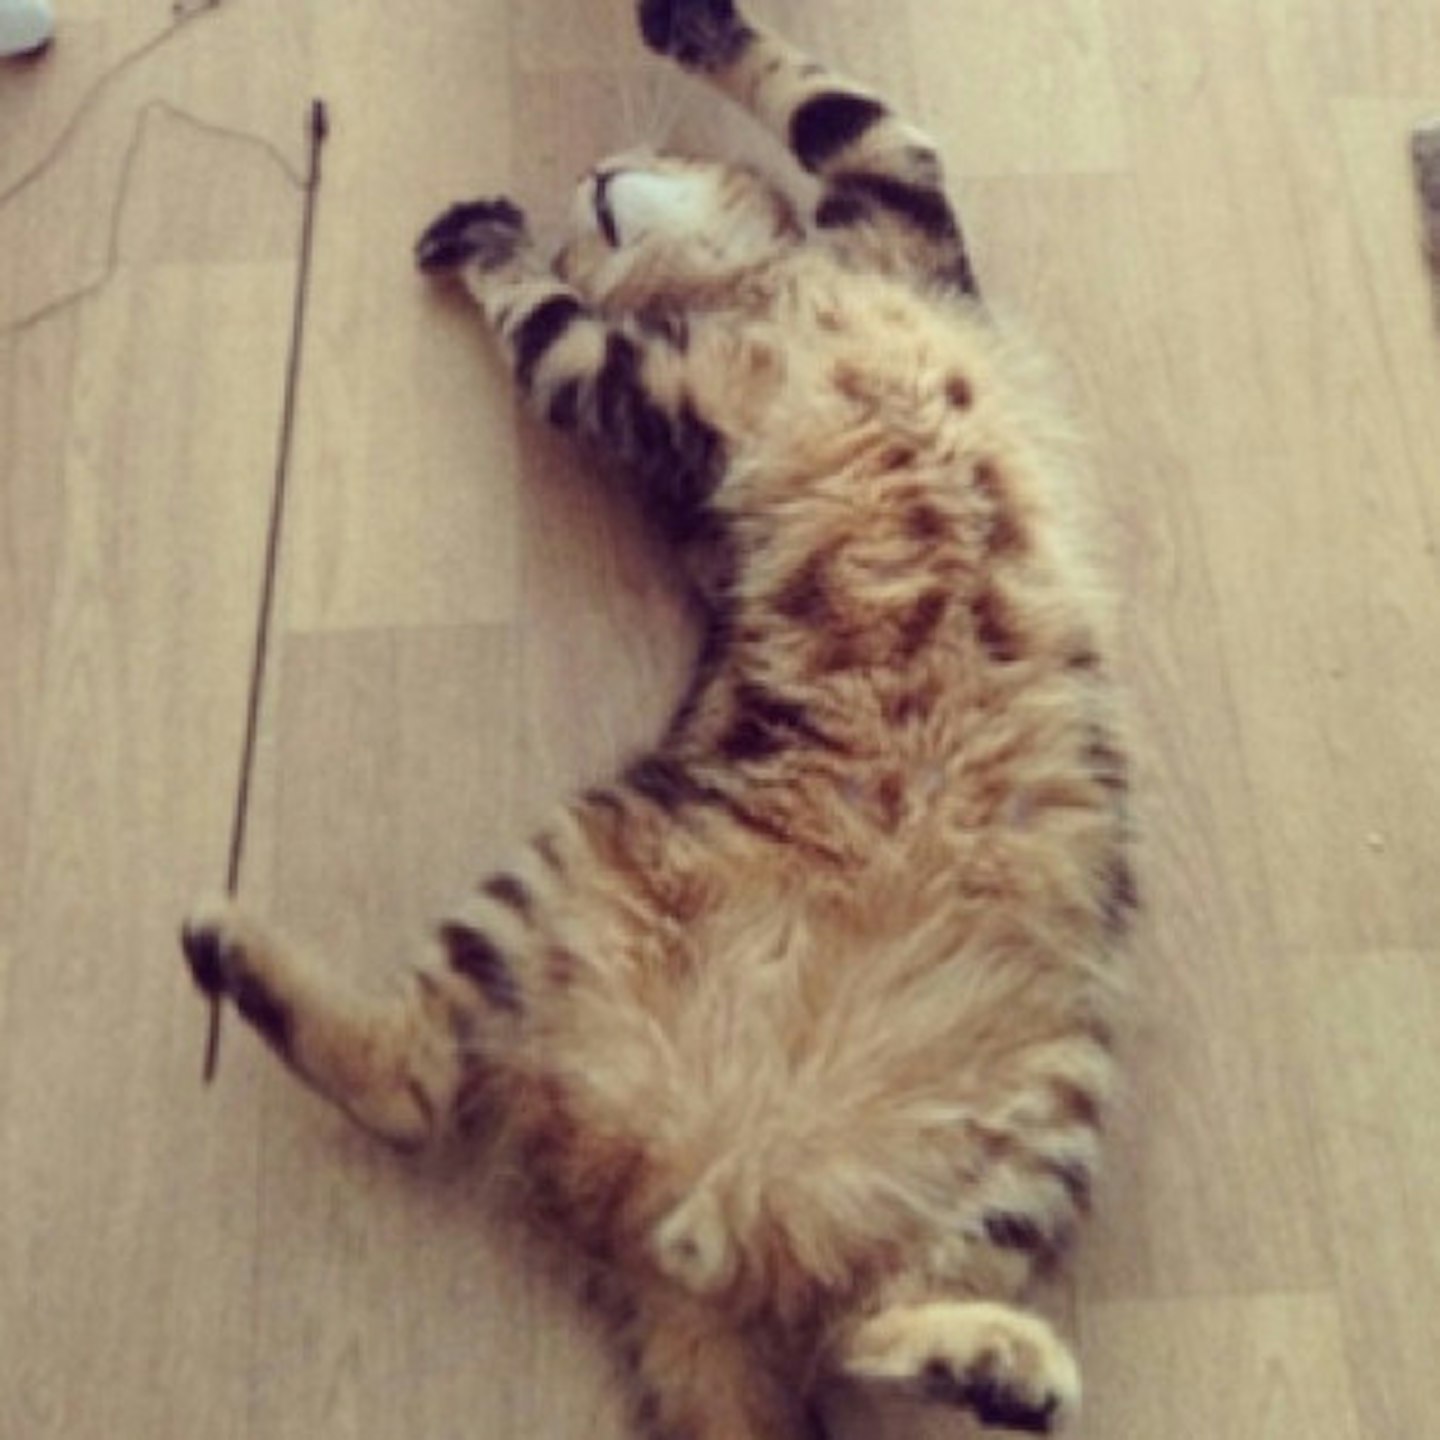 One of the cats attempting a yoga pose